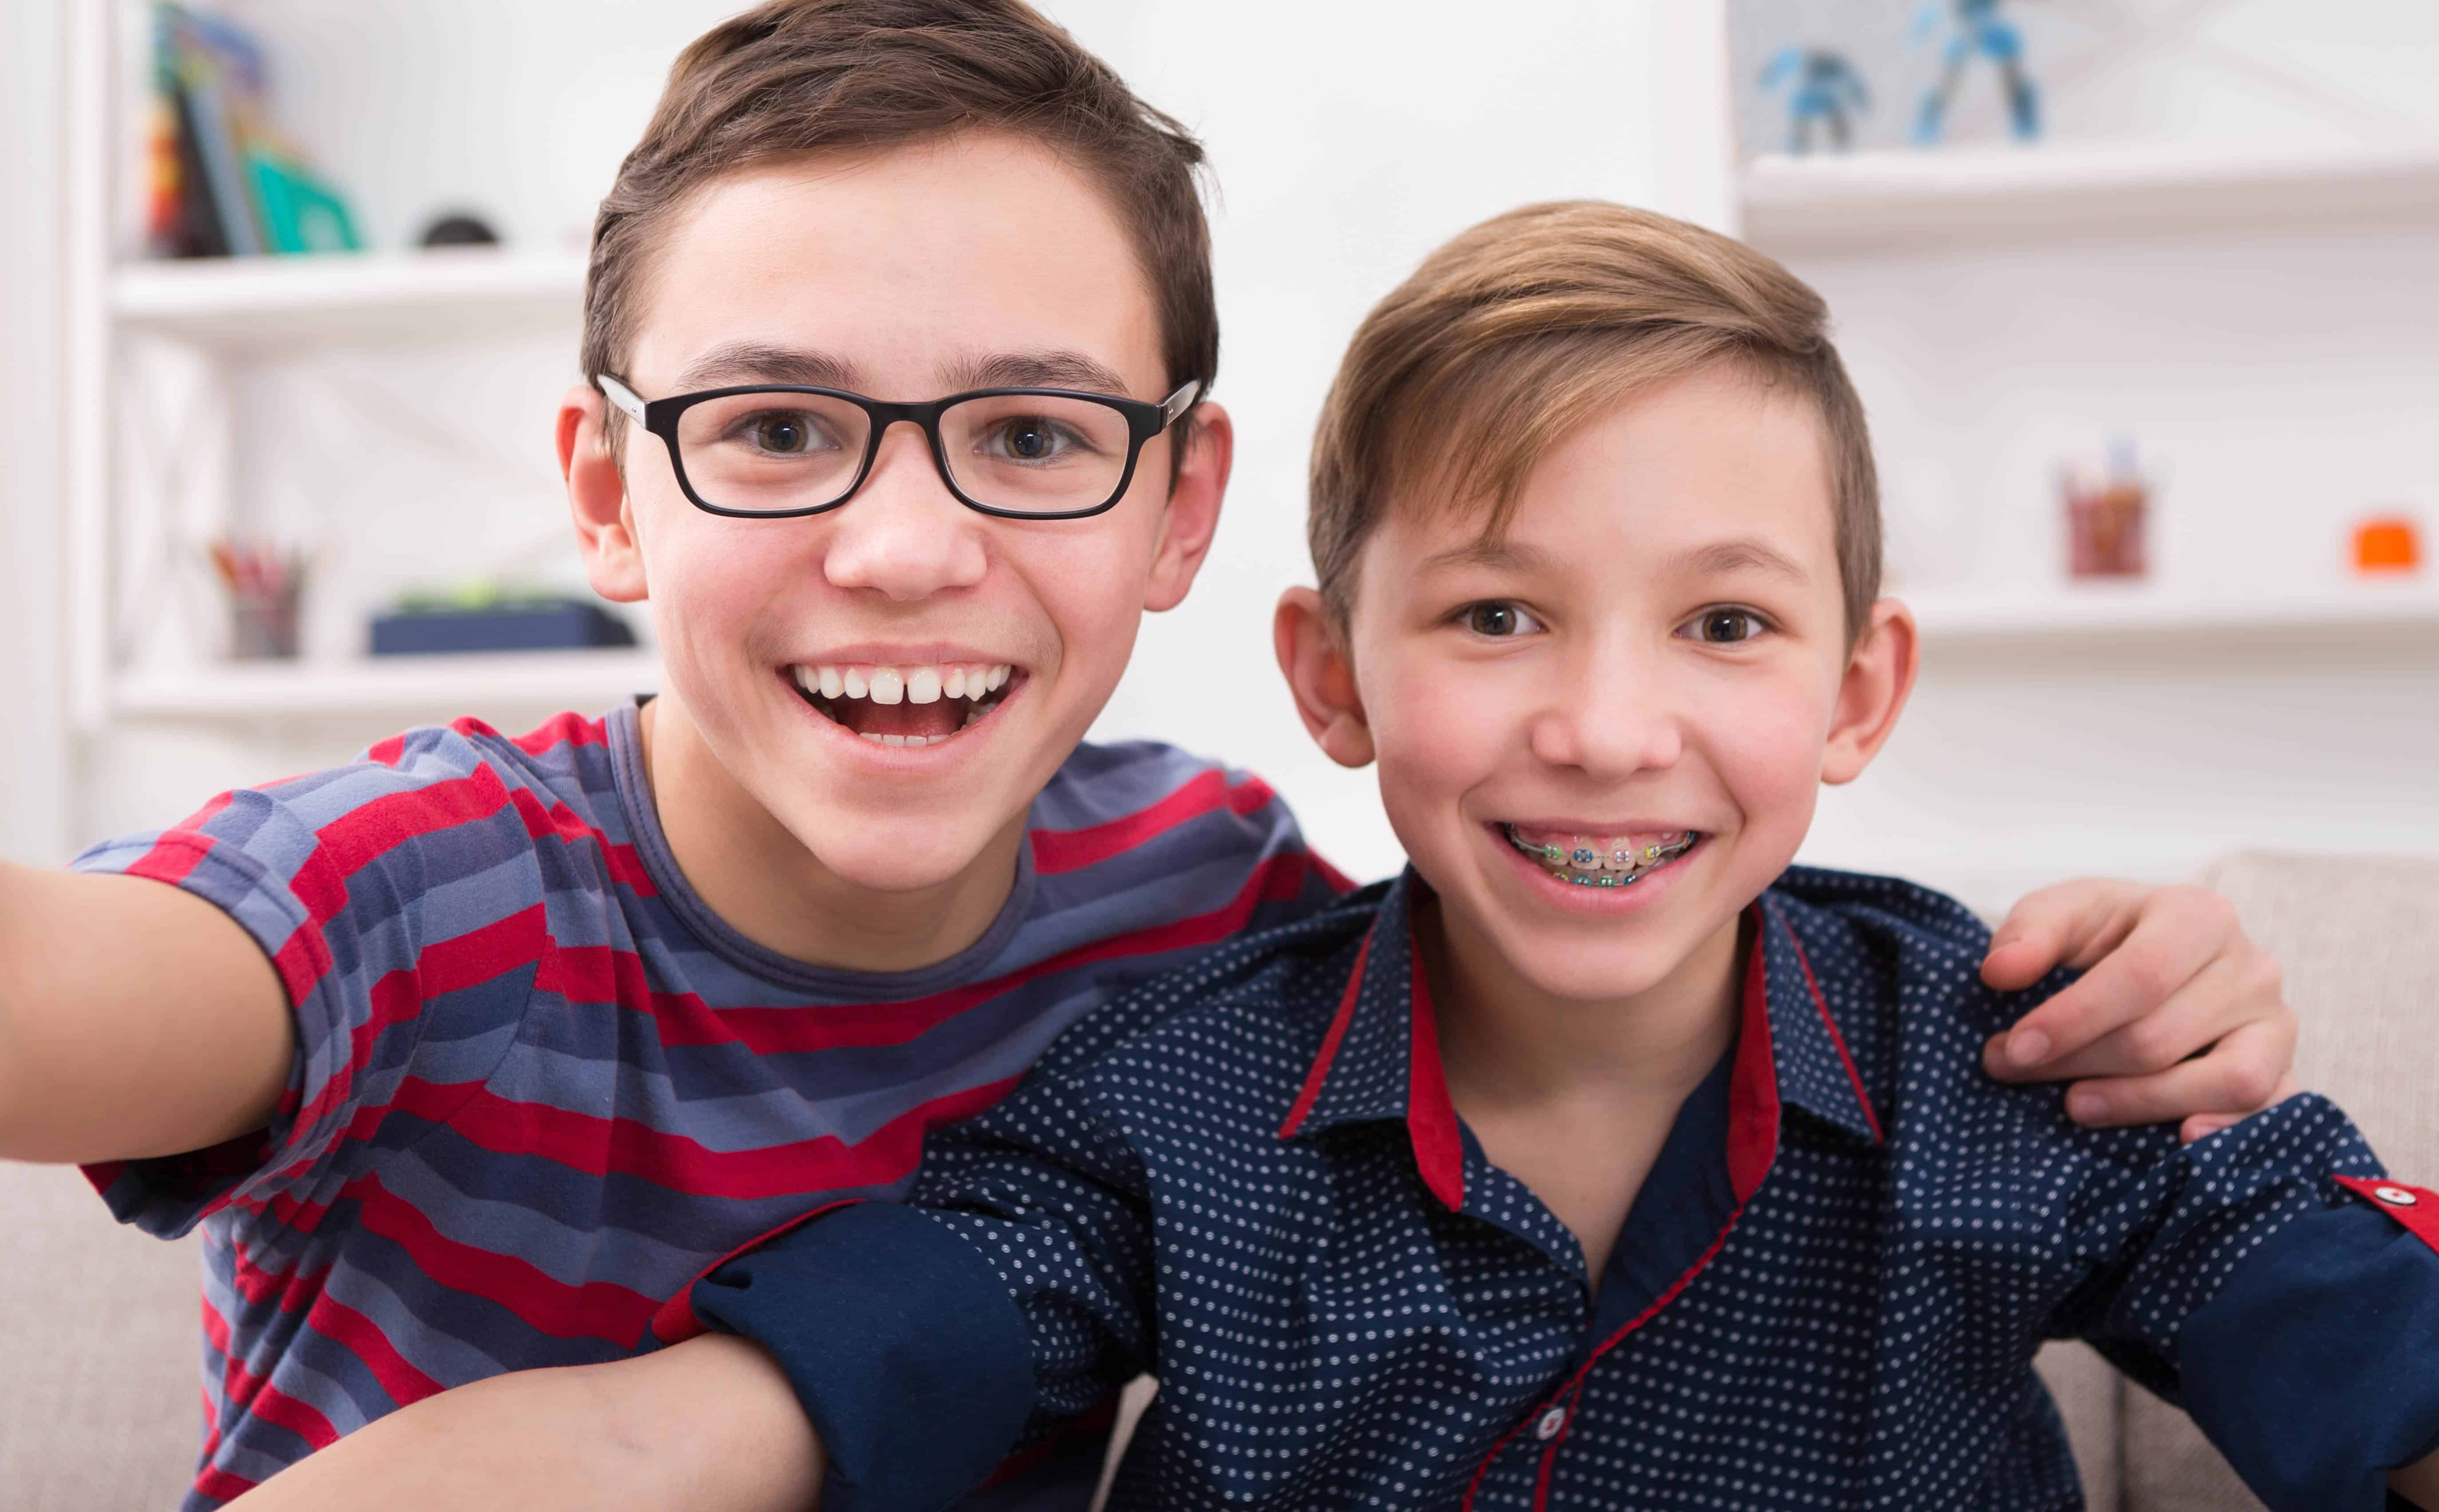 Does My Child Need Braces? - Ascent Dental Care Loughborough